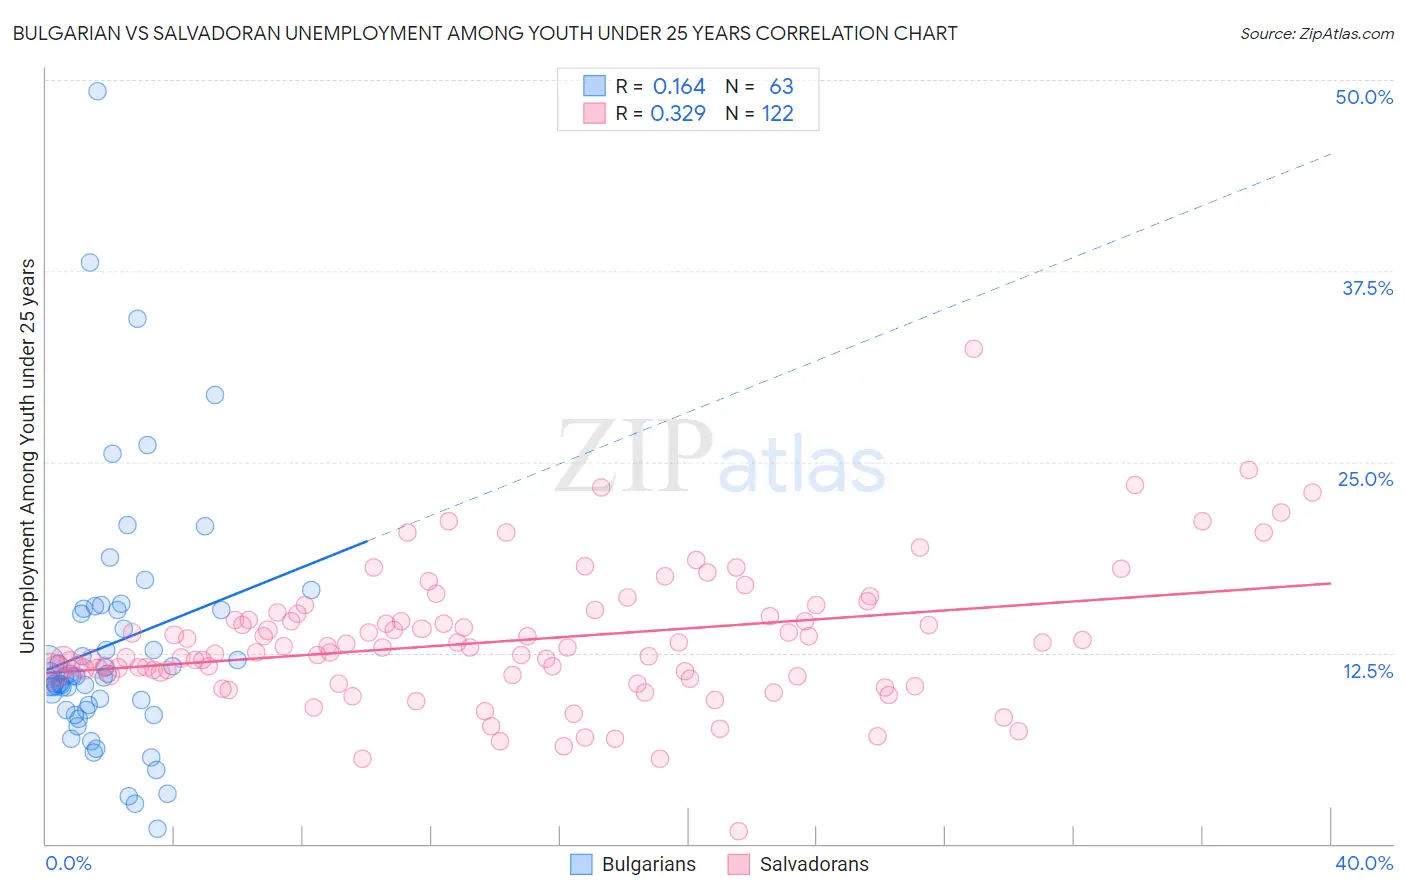 Bulgarian vs Salvadoran Unemployment Among Youth under 25 years